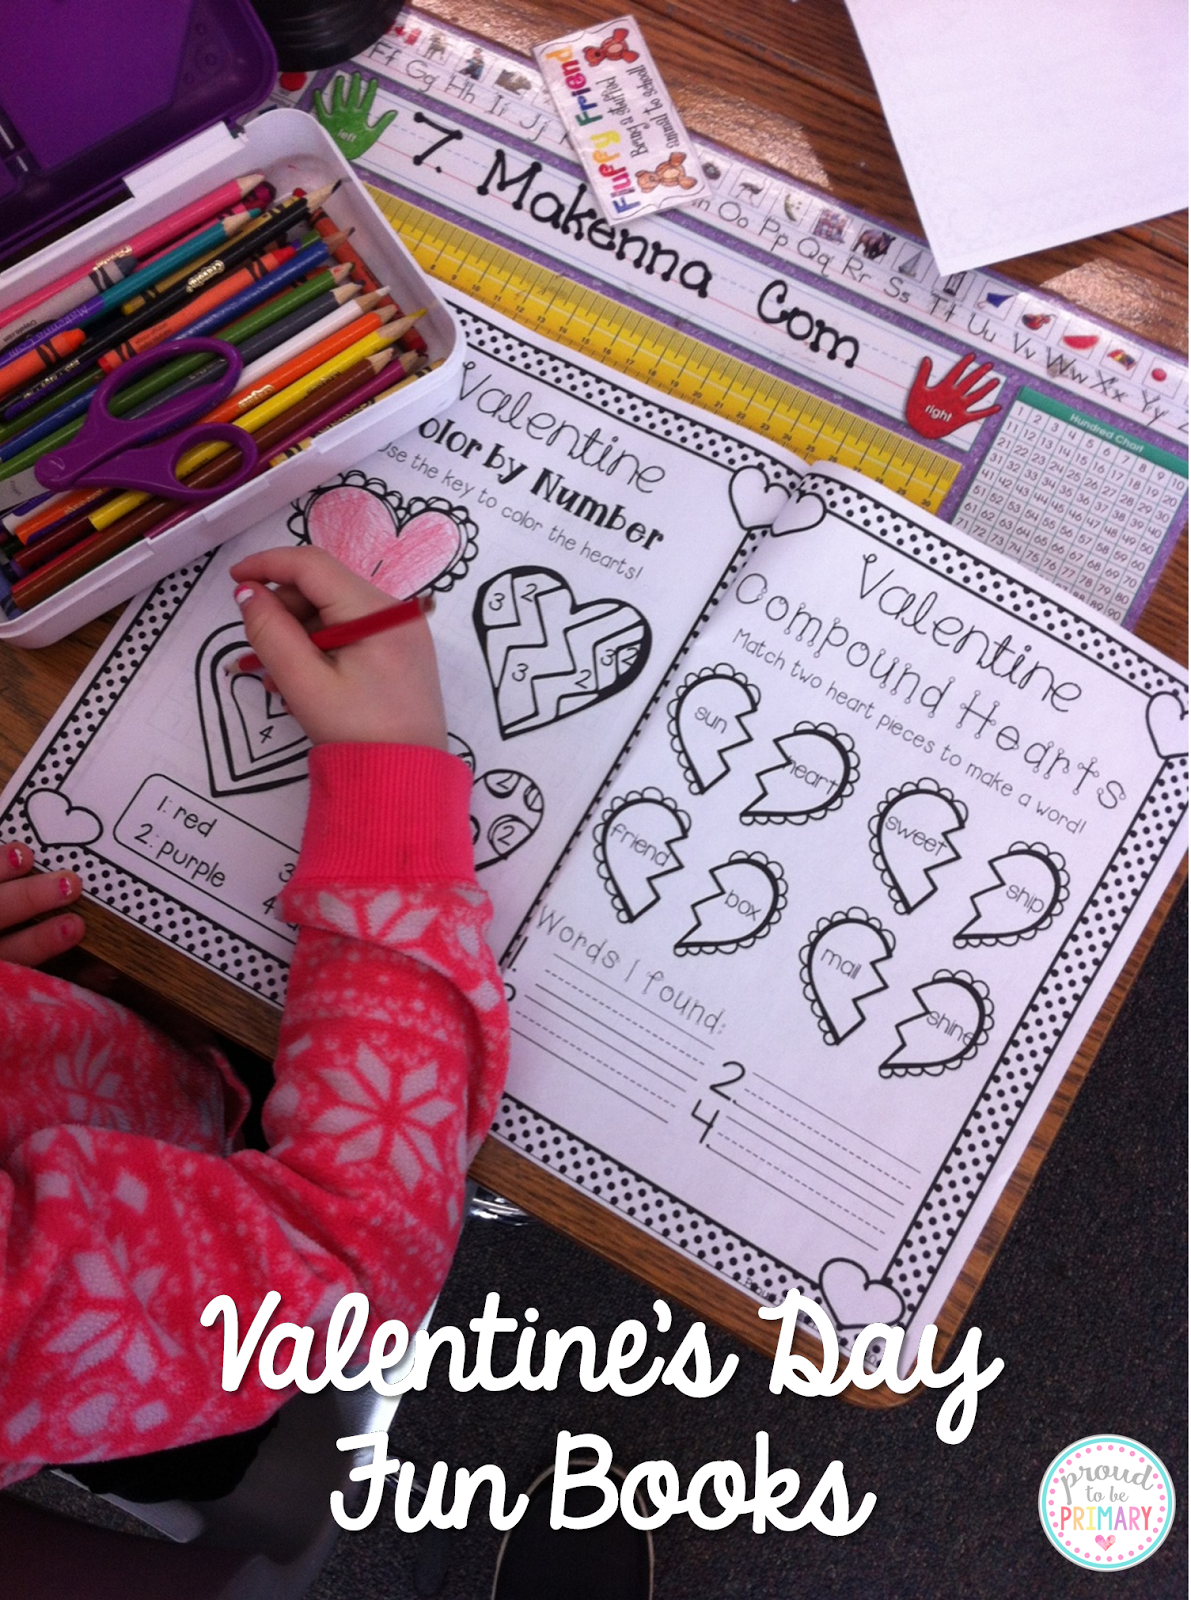 Valentine's Day Activities for Elementary School Proud to be Primary